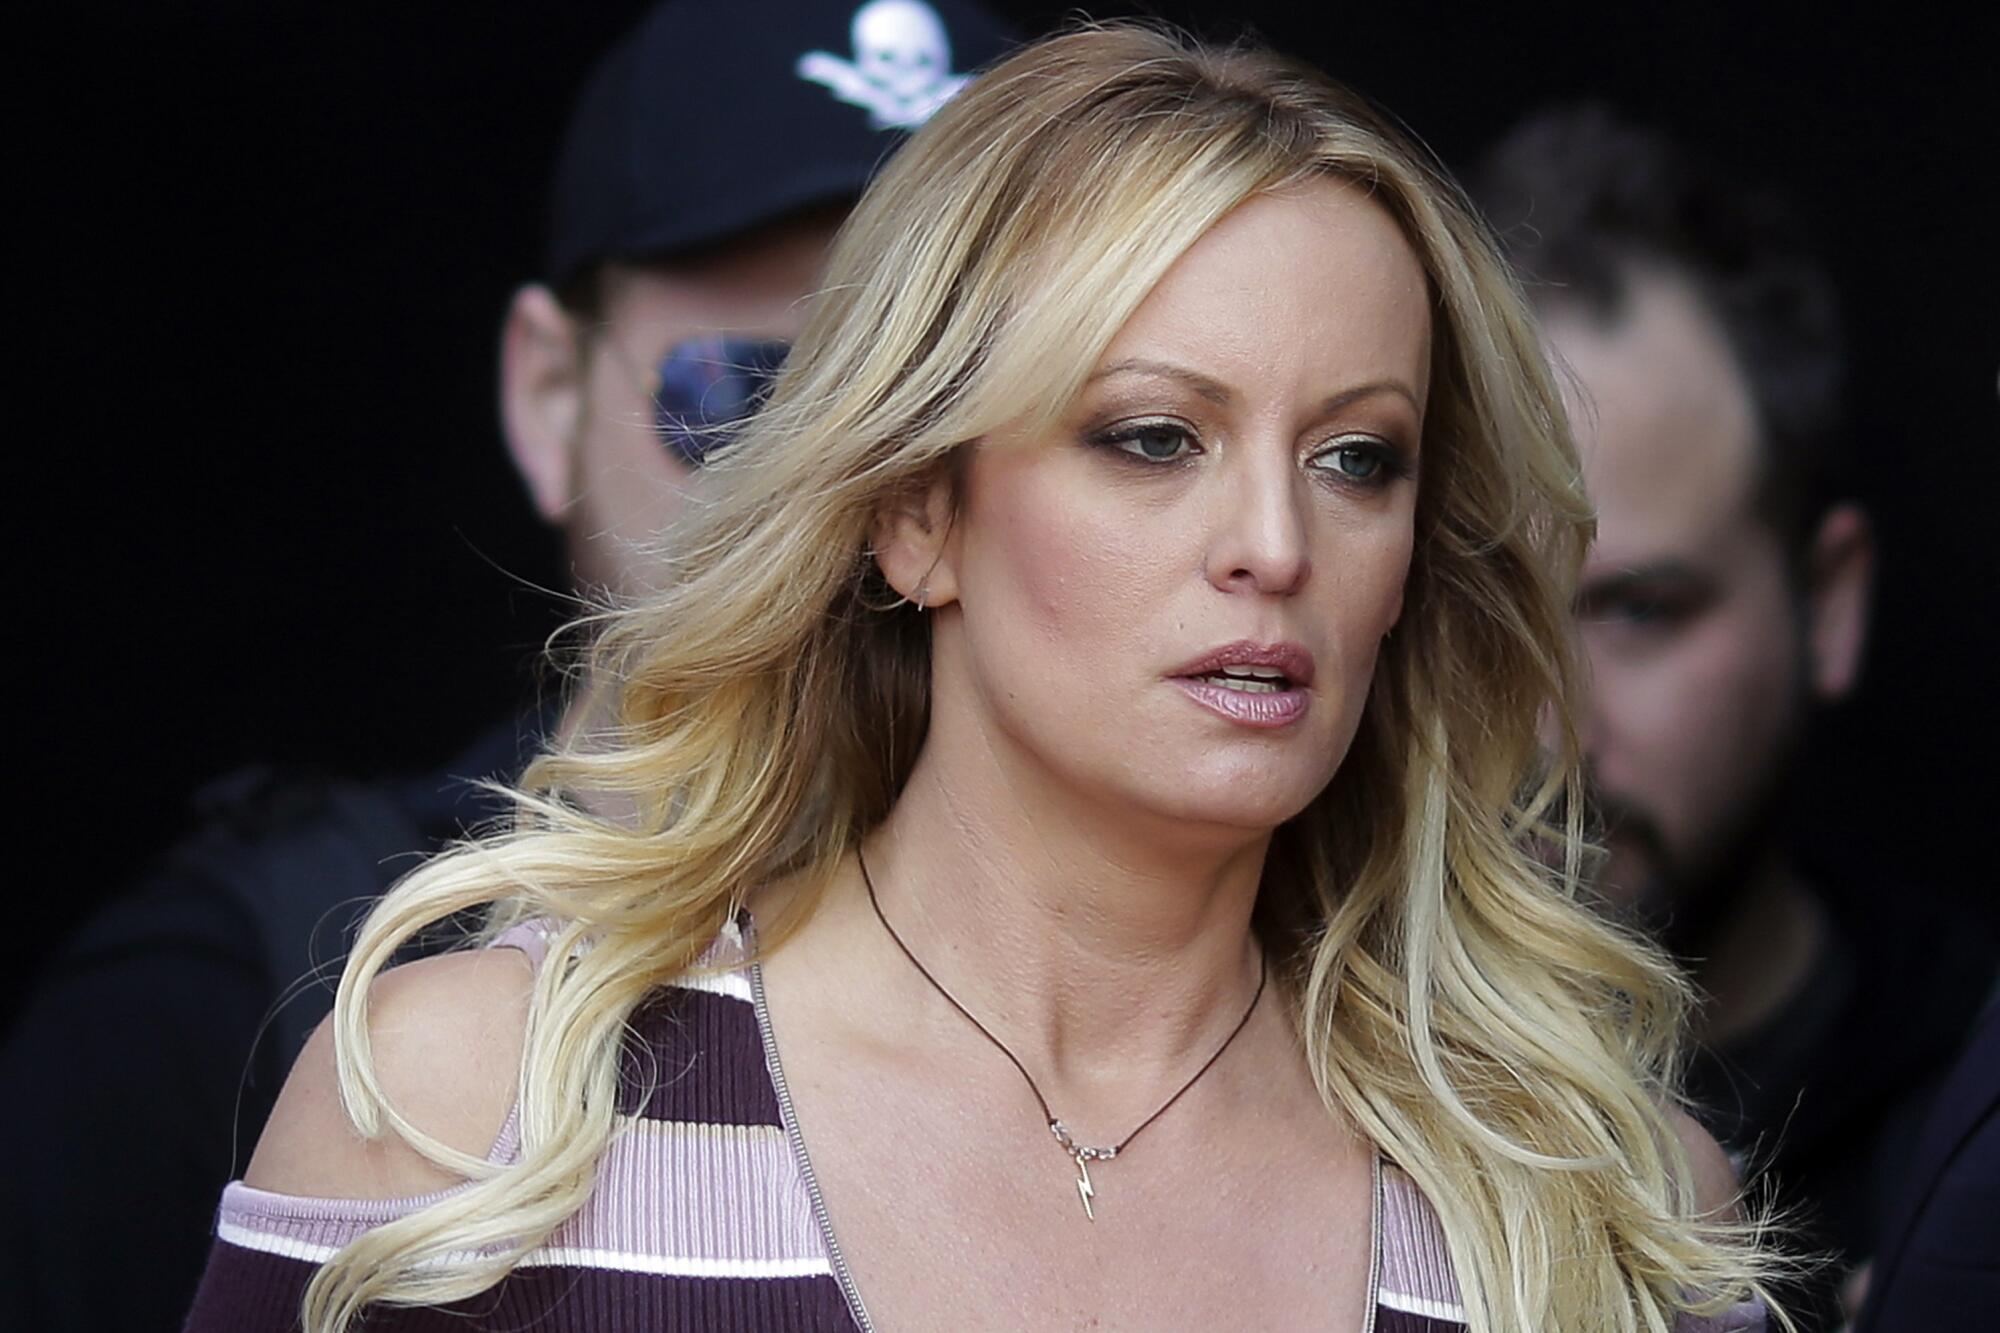 Stormy Daniels pictured from the shoulders up as she walks past two men in the background.